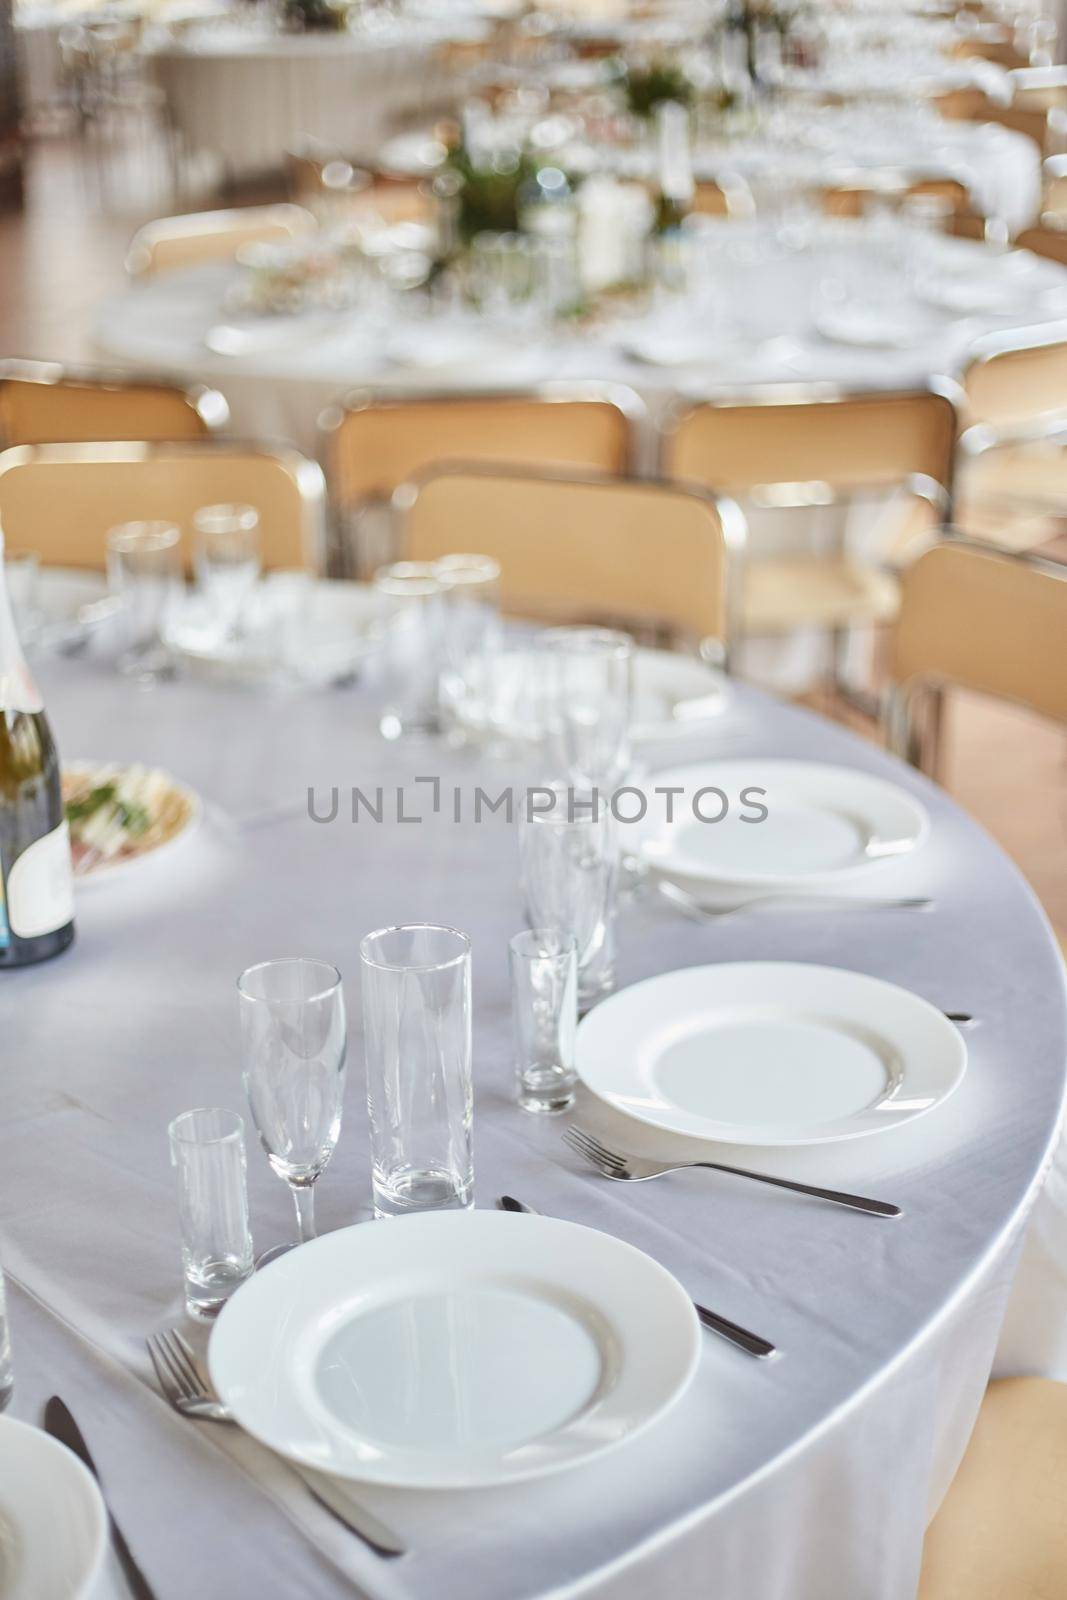 Table set for an event party or wedding reception. Banquet table design. Festive table setting. Glass and plates on the table.